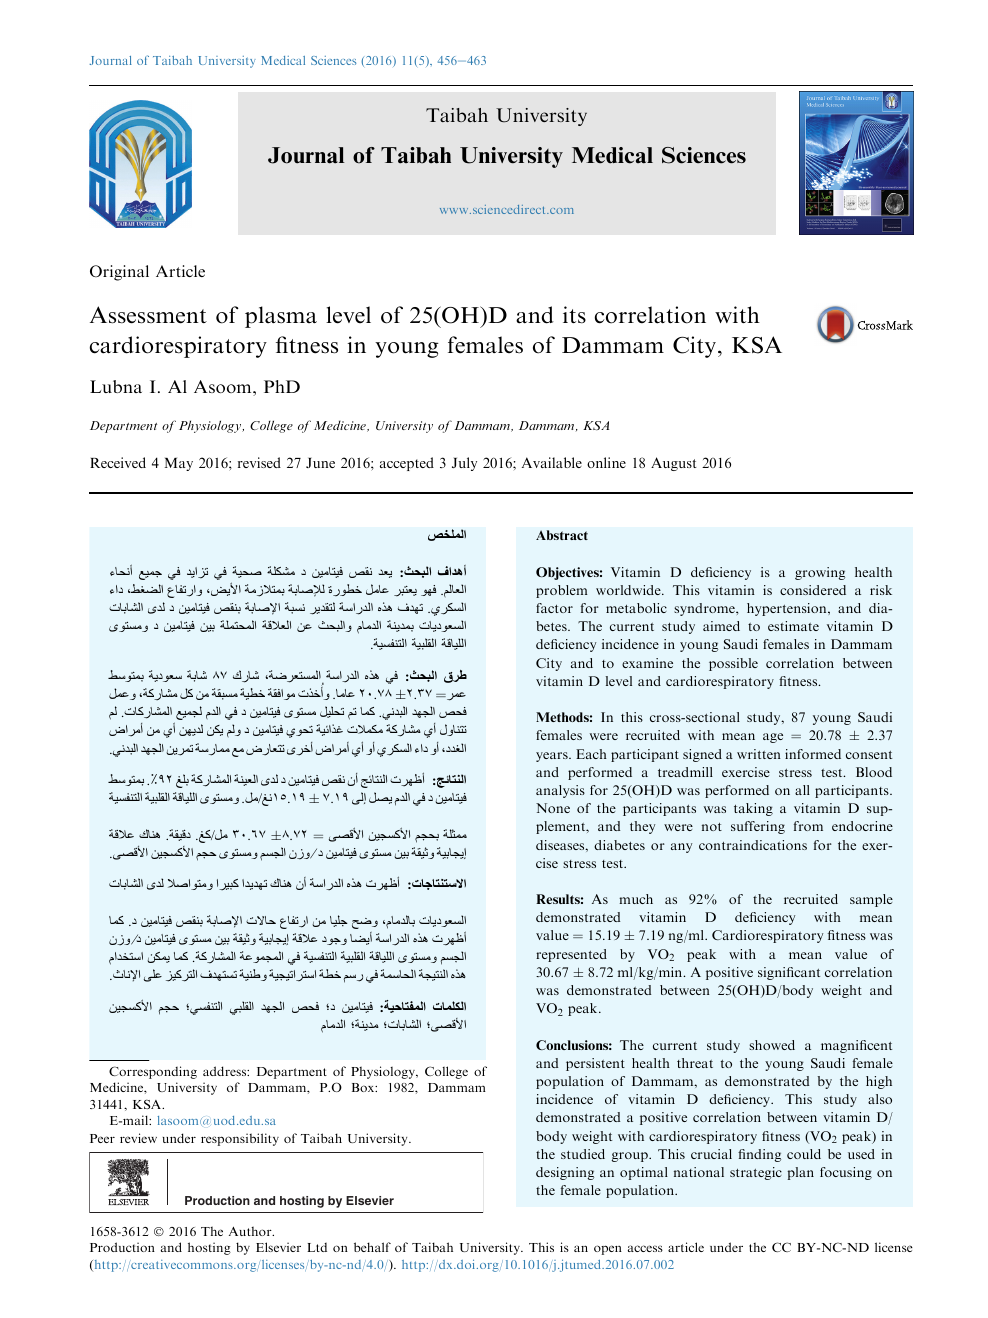 Assessment Of Plasma Level Of 25 Oh D And Its Correlation With Cardiorespiratory Fitness In Young Females Of Dammam City Ksa Topic Of Research Paper In Clinical Medicine Download Scholarly Article Pdf And